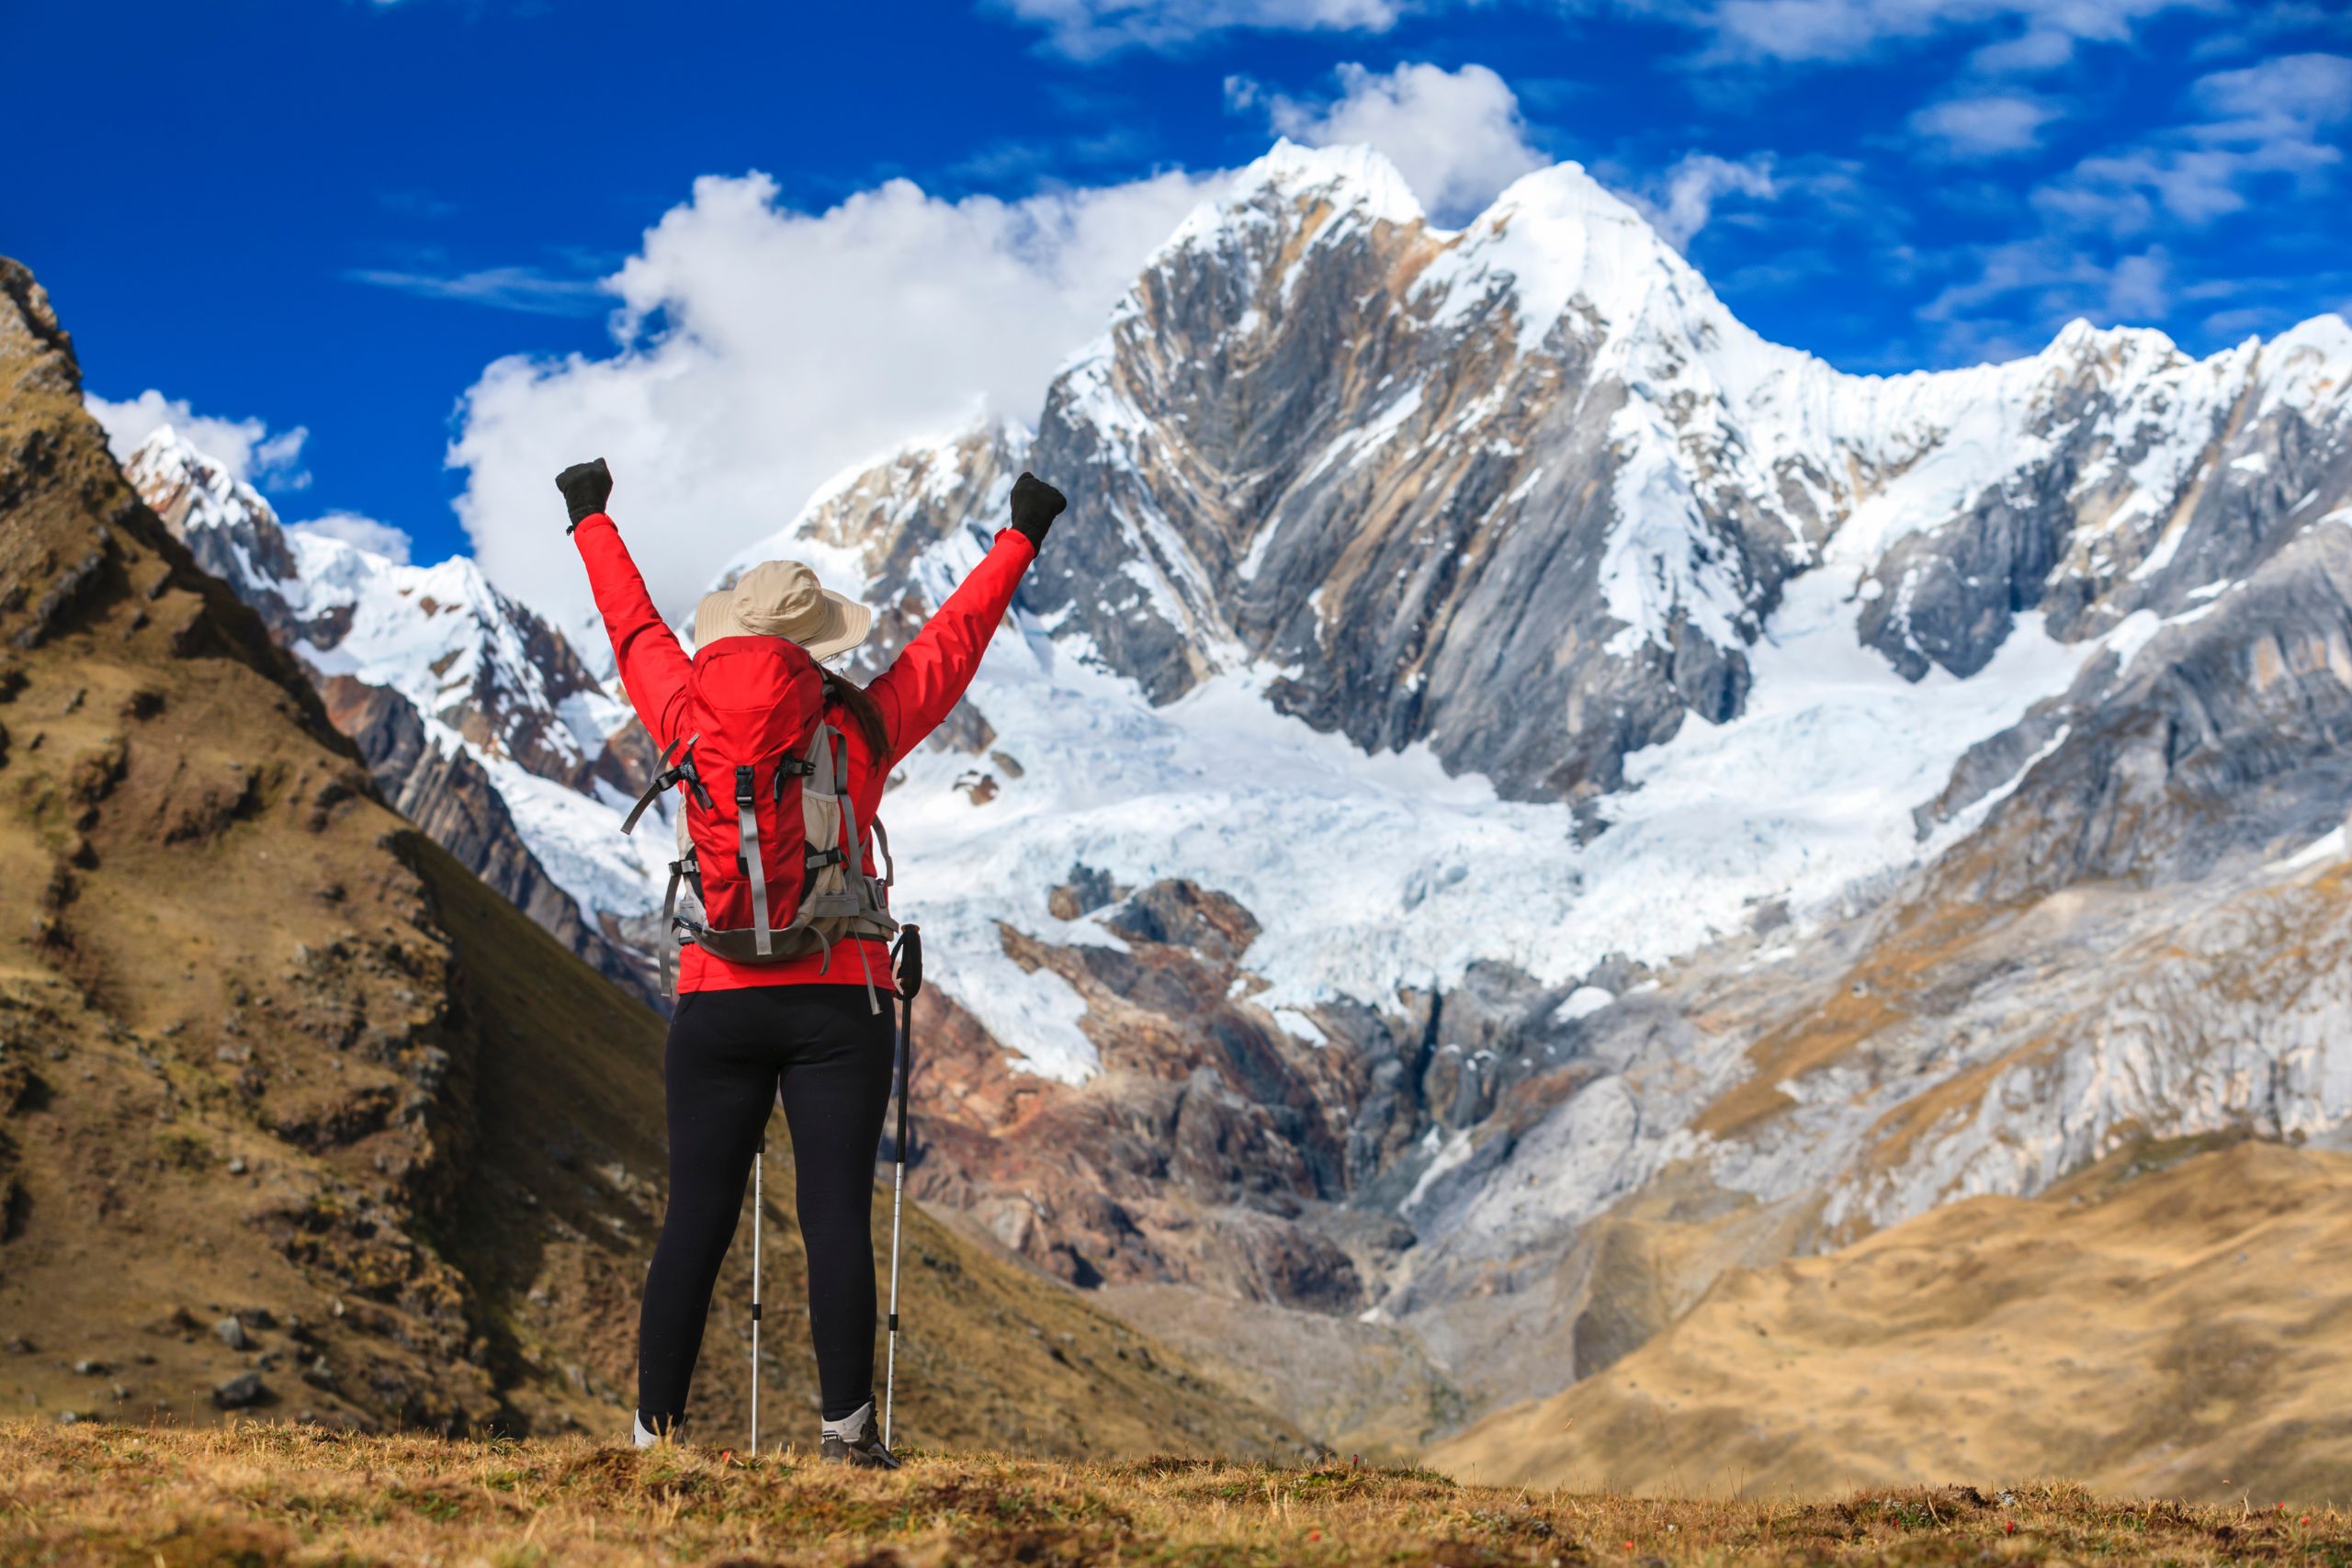 Survival Guide: Managing High Altitudes in the Peruvian Andes